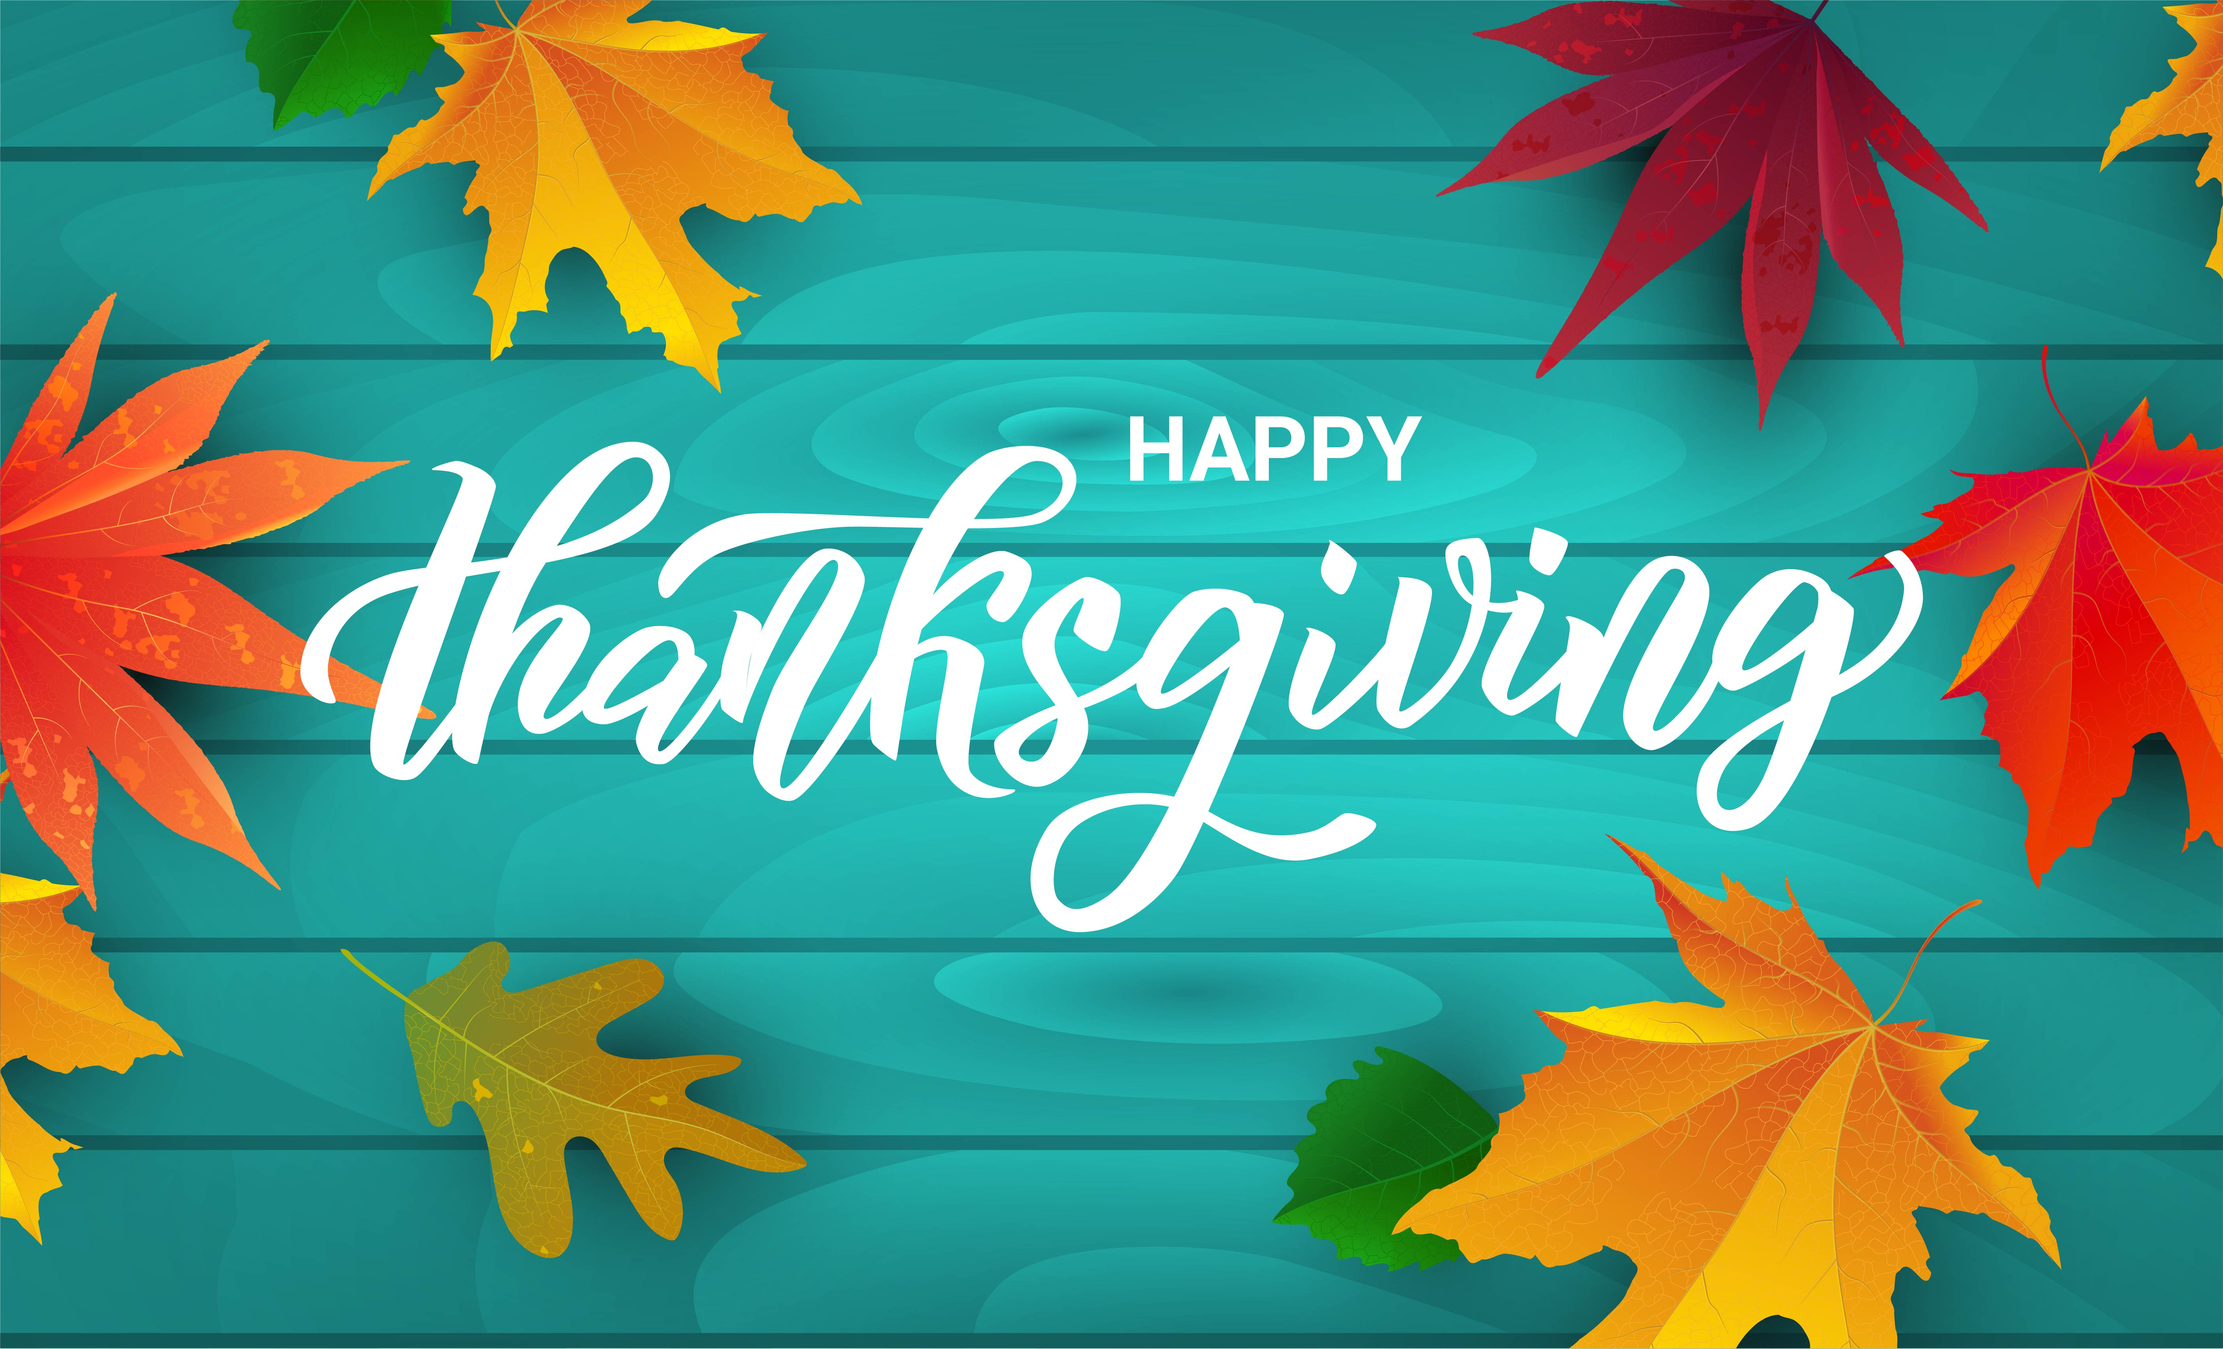 Happy Thanksgiving saying in white lettering, teal background and colorful leaves